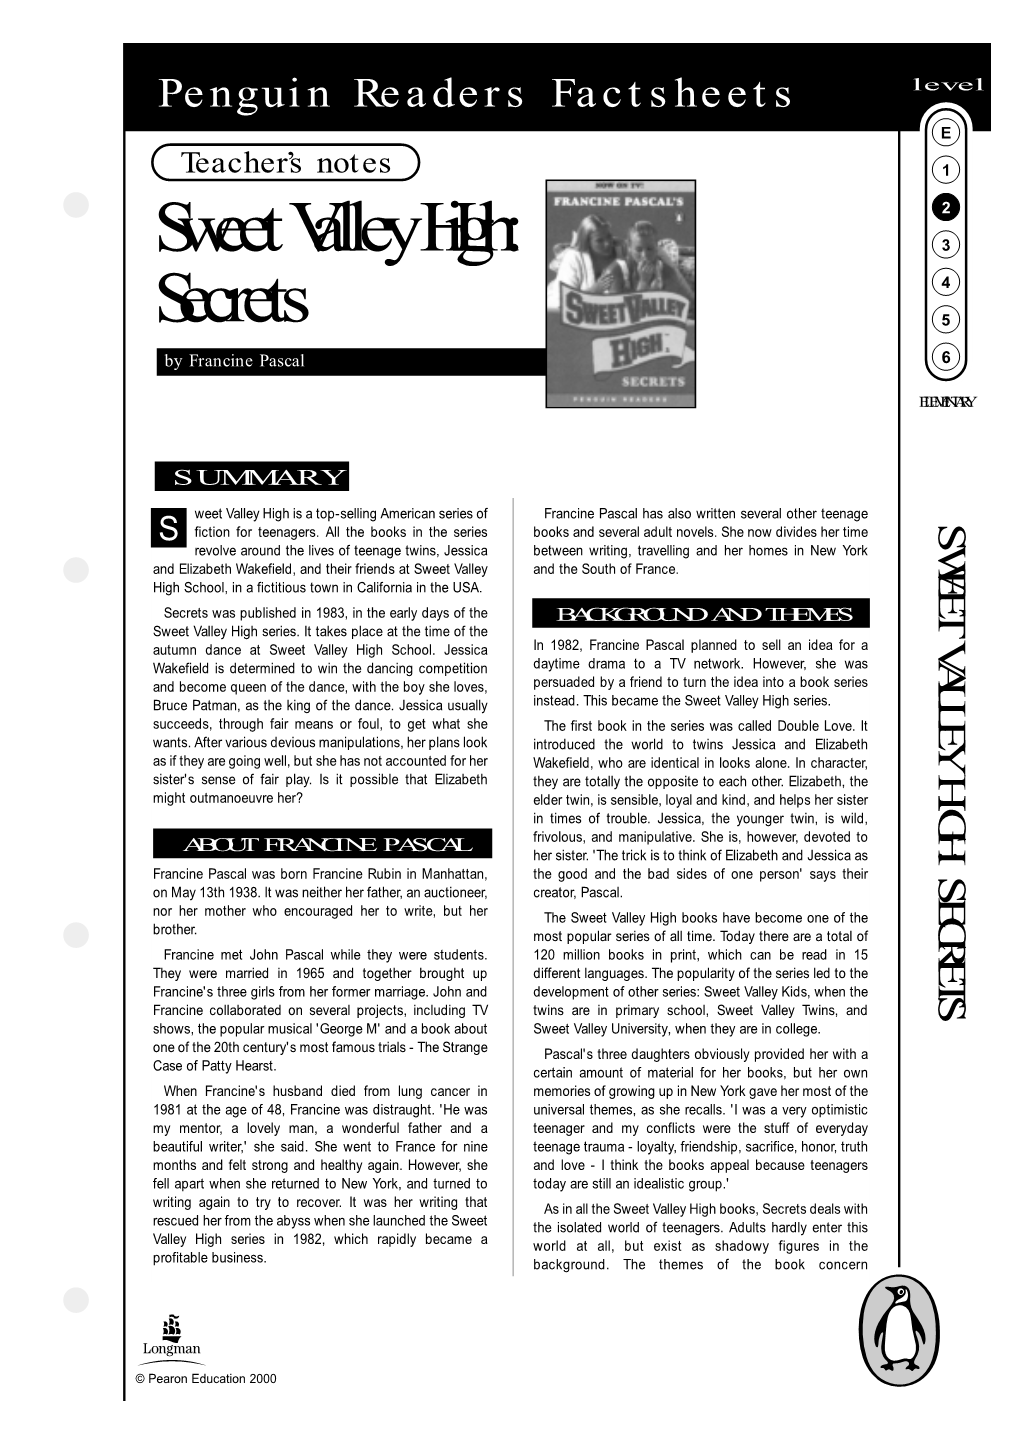 SWEET VALLEY HIGH: SECRETS S Fiction for Teenagers